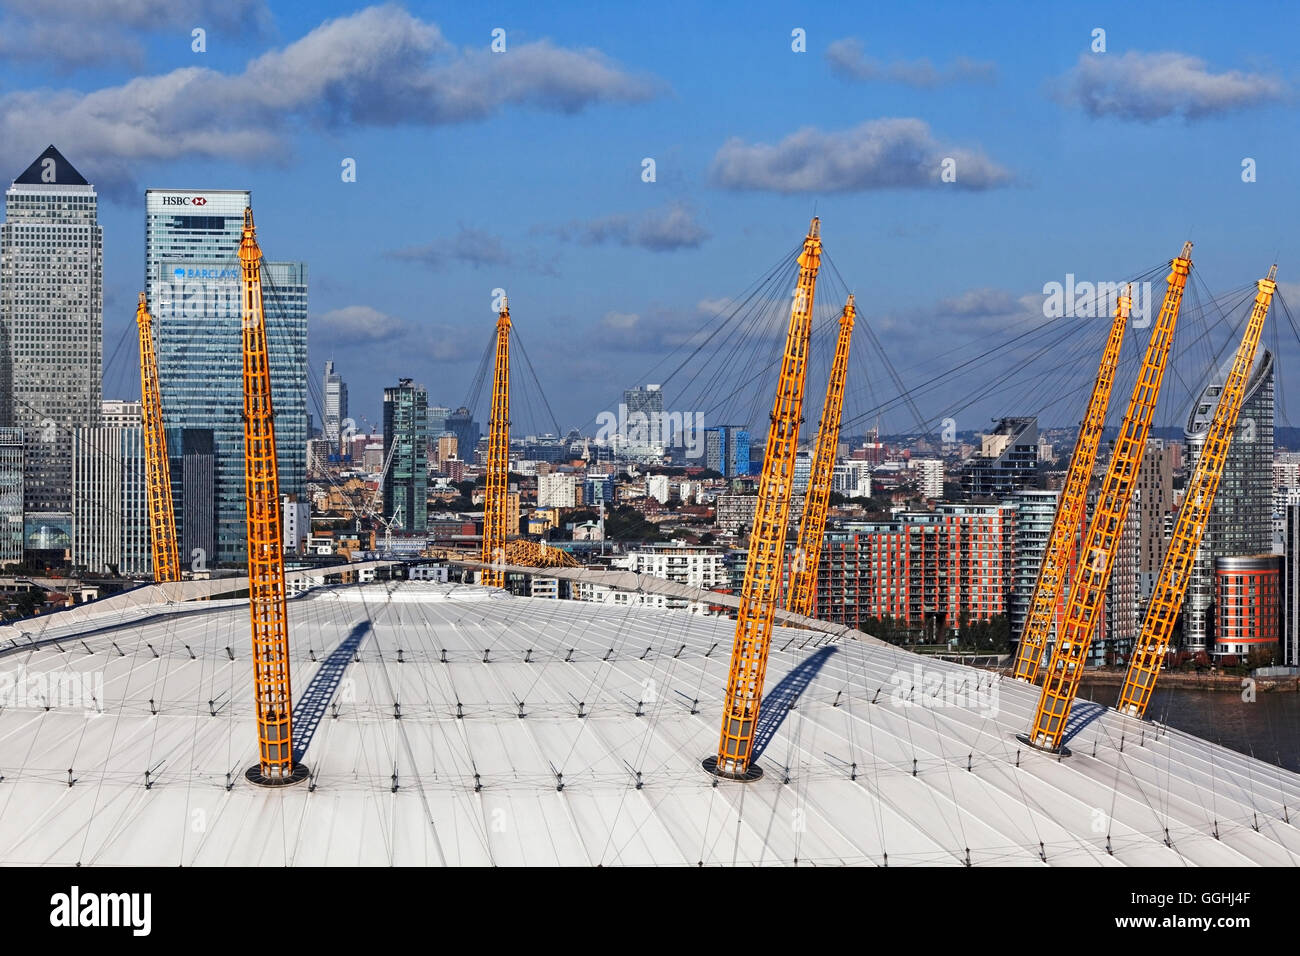 Millenium Dome and behind the skyline of the Isle of dogs and the City of London, seen from the Emirates Air Line, London, Engla Stock Photo